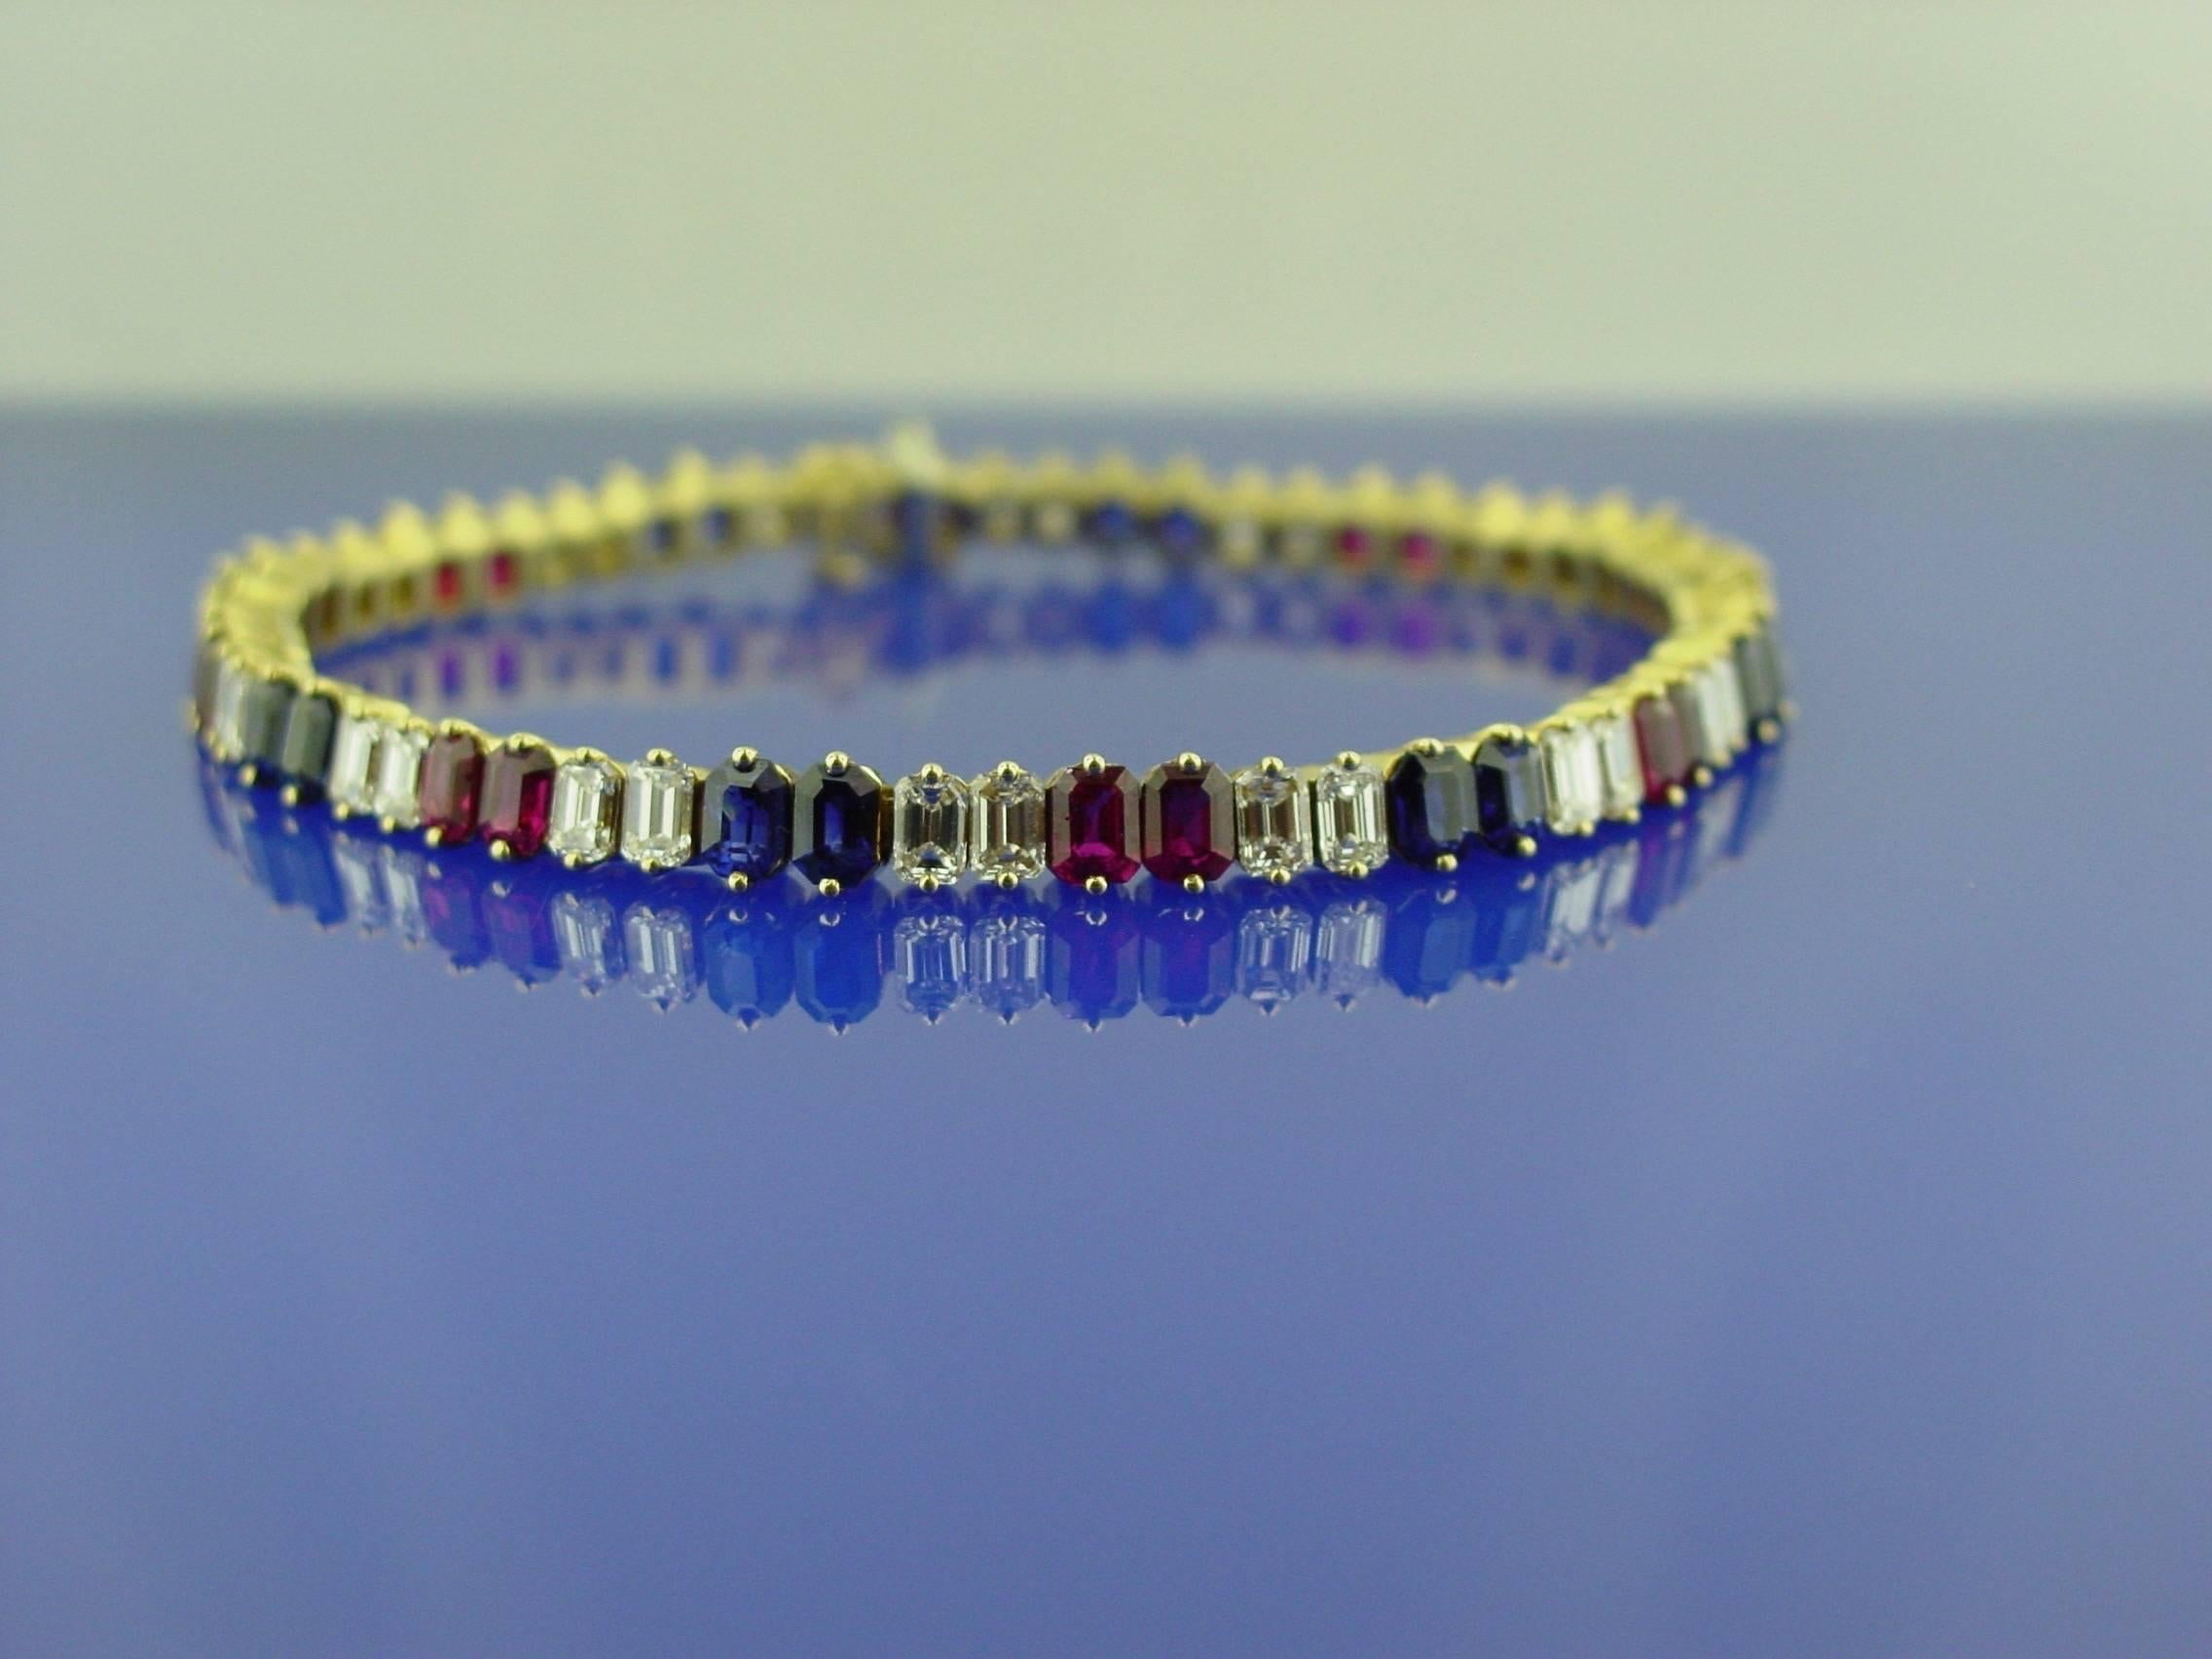 A beautifully bright ruby, diamond and sapphire line bracelet mounted in 18 karat yellow gold. The bracelet is set with thirty-two emerald cut diamonds weighing approximately 5.15 carats and approximately 6.65 carats each of emerald cut rubies and